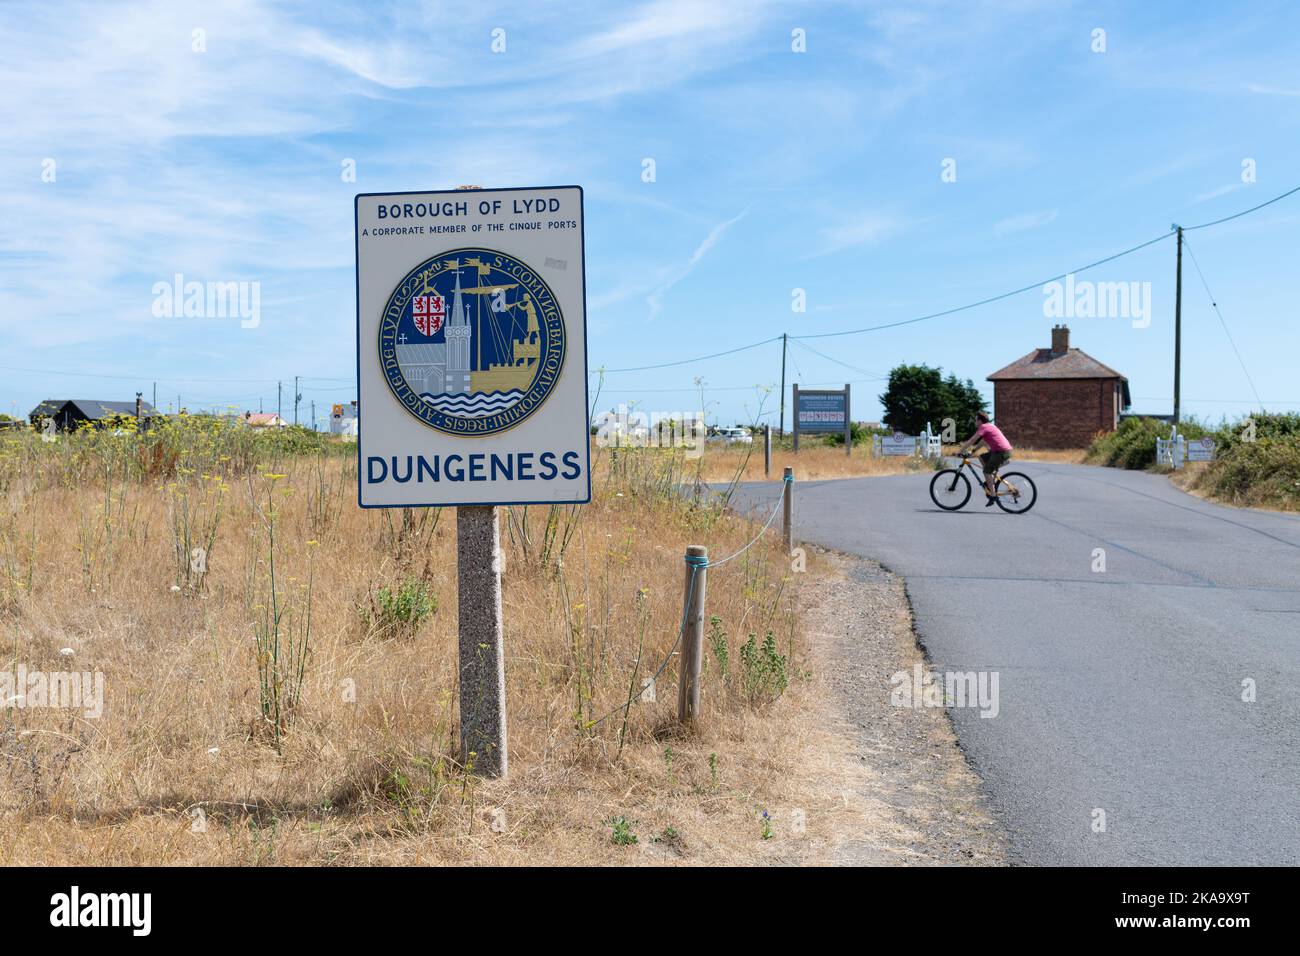 Panneau Dungeness, Borough of Lydd, Kent, Angleterre, Royaume-Uni Banque D'Images